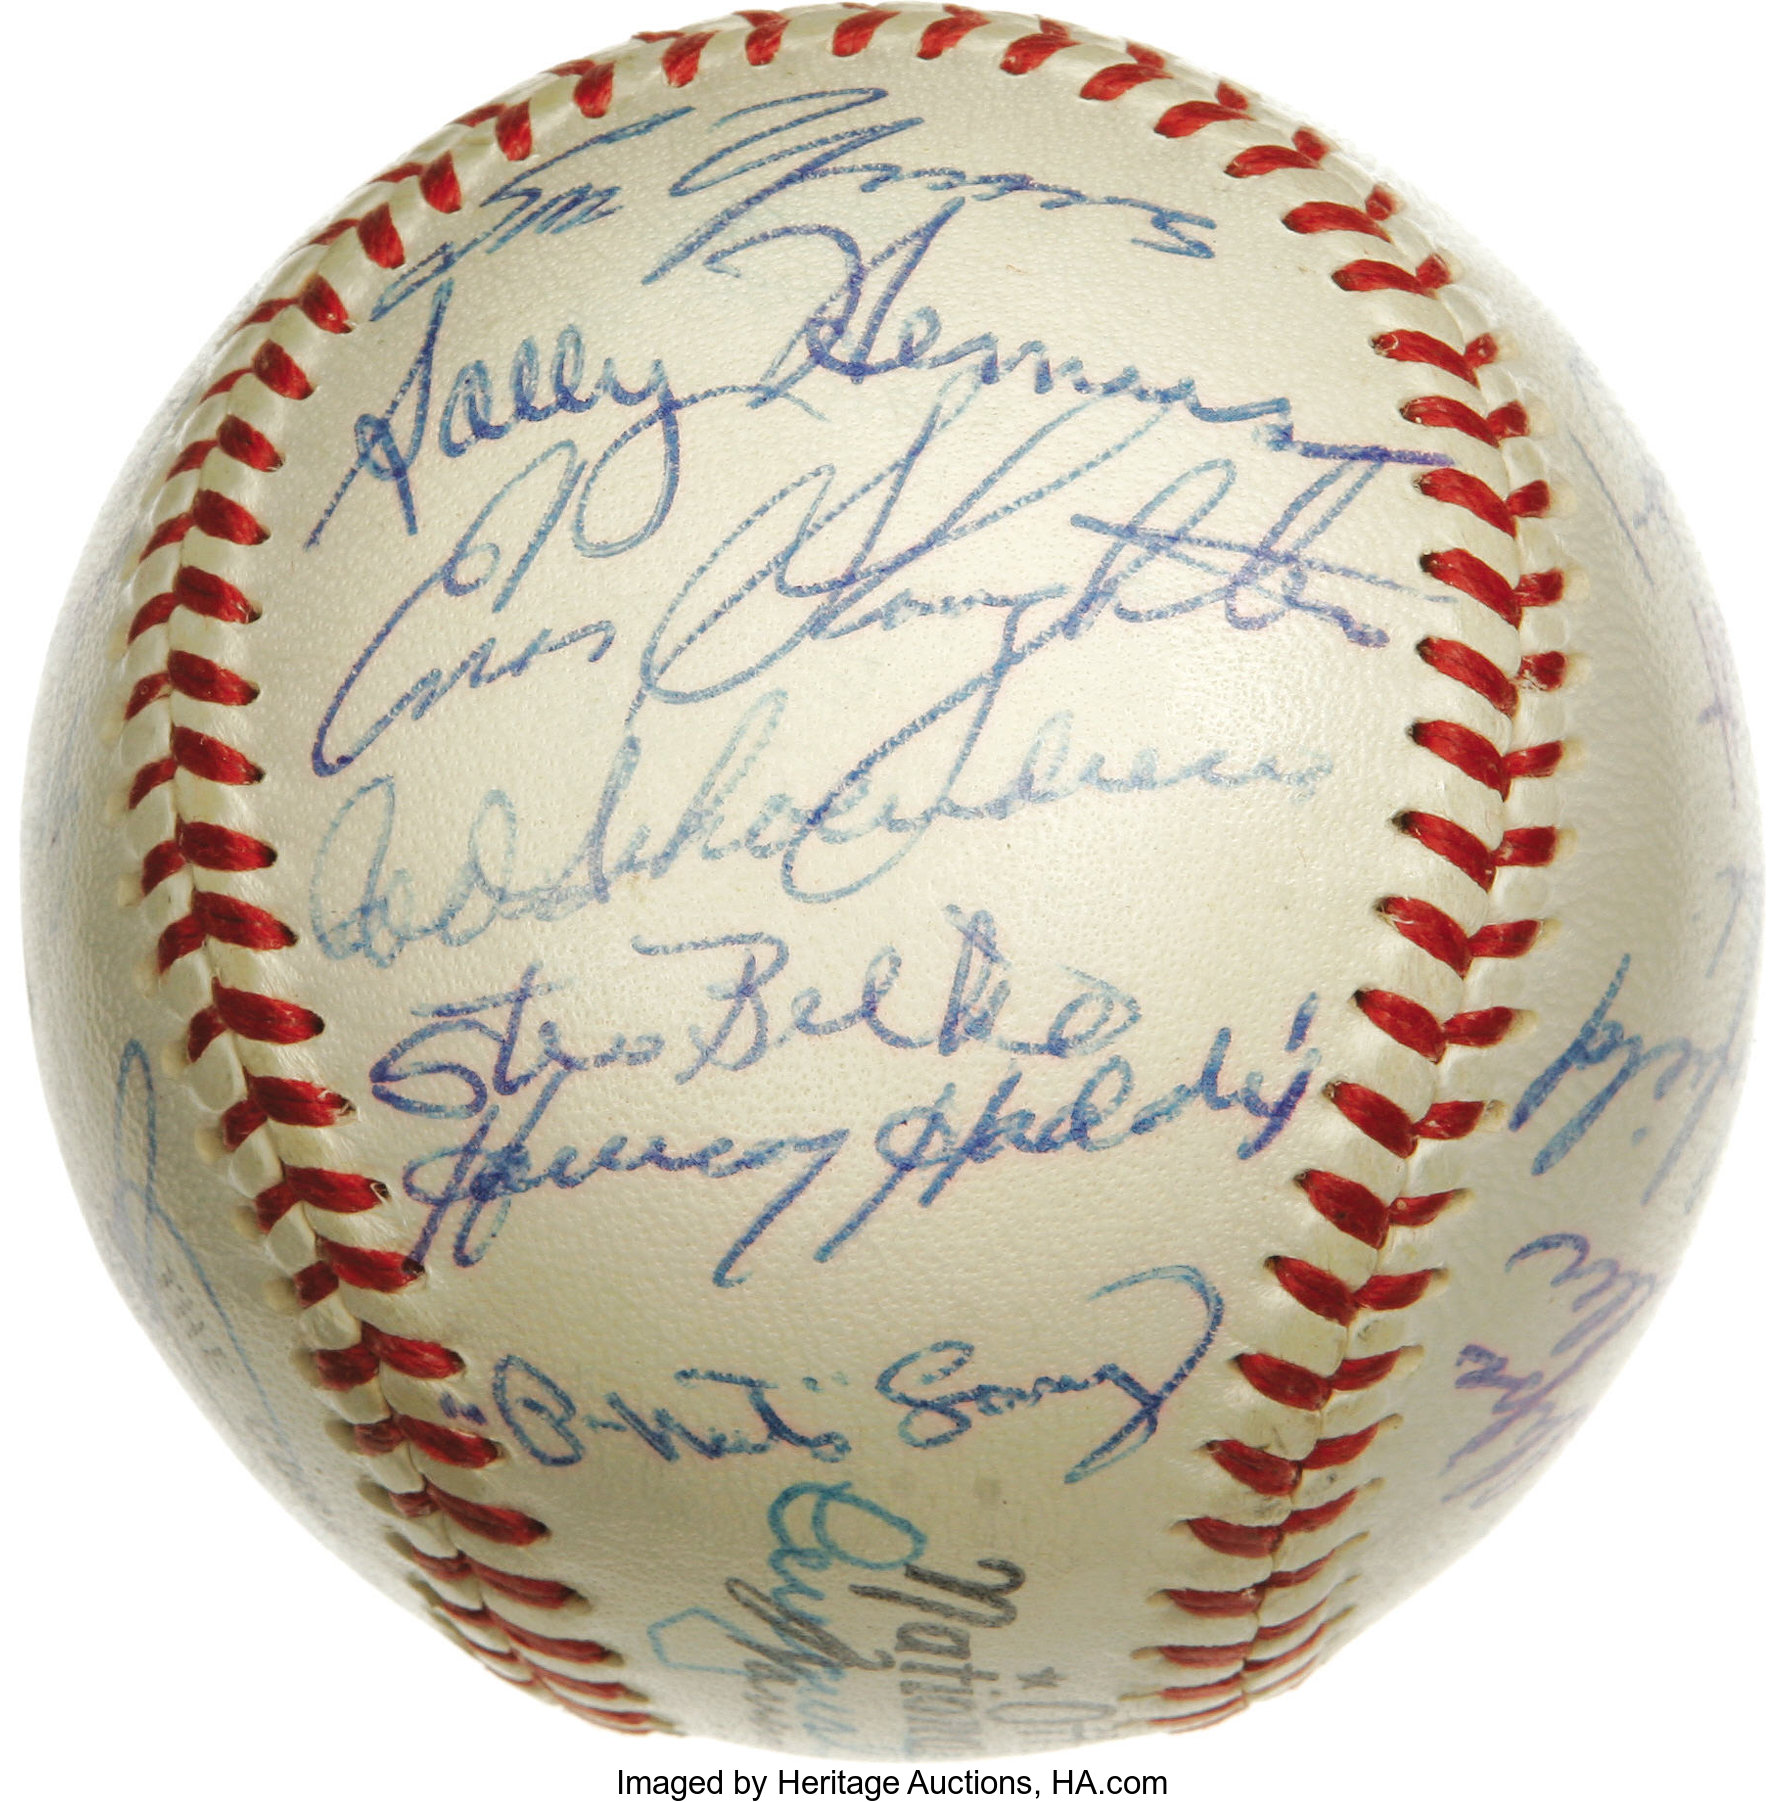 1953 St. Louis Cardinals Team Signed Baseball. Much Hall of Fame | Lot #10322 | Heritage Auctions